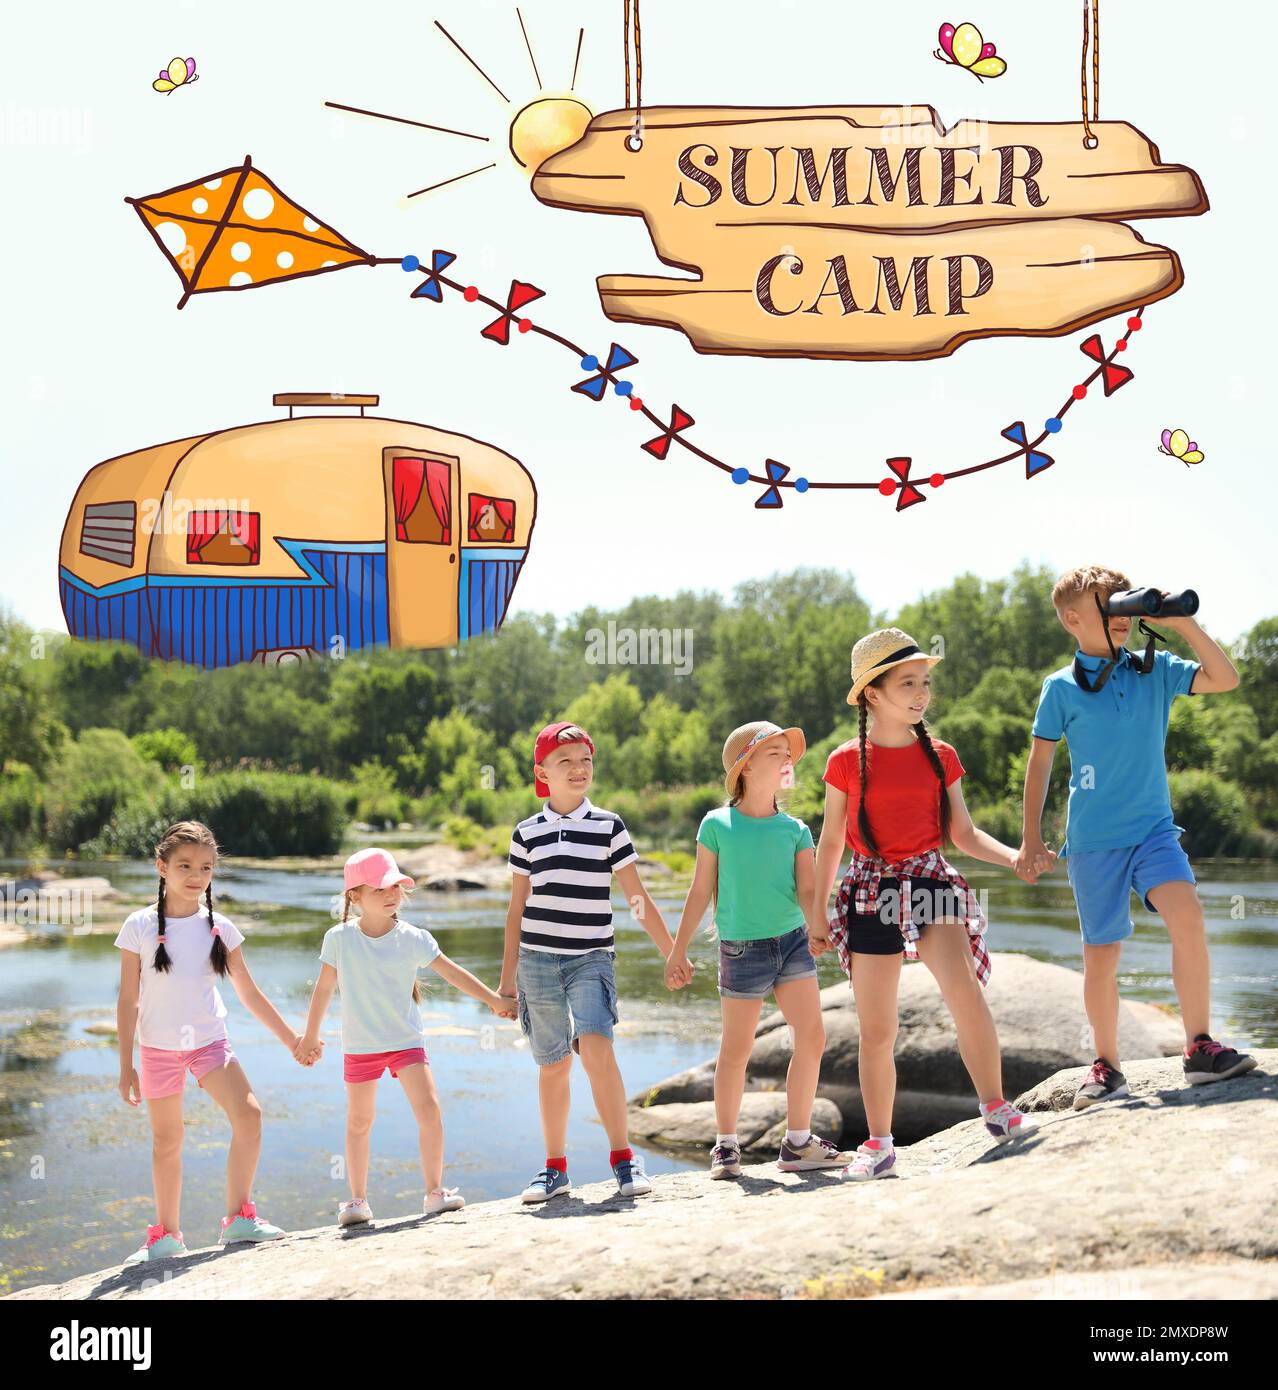 Children at summer camp. Illustrations on background Stock Photo - Alamy